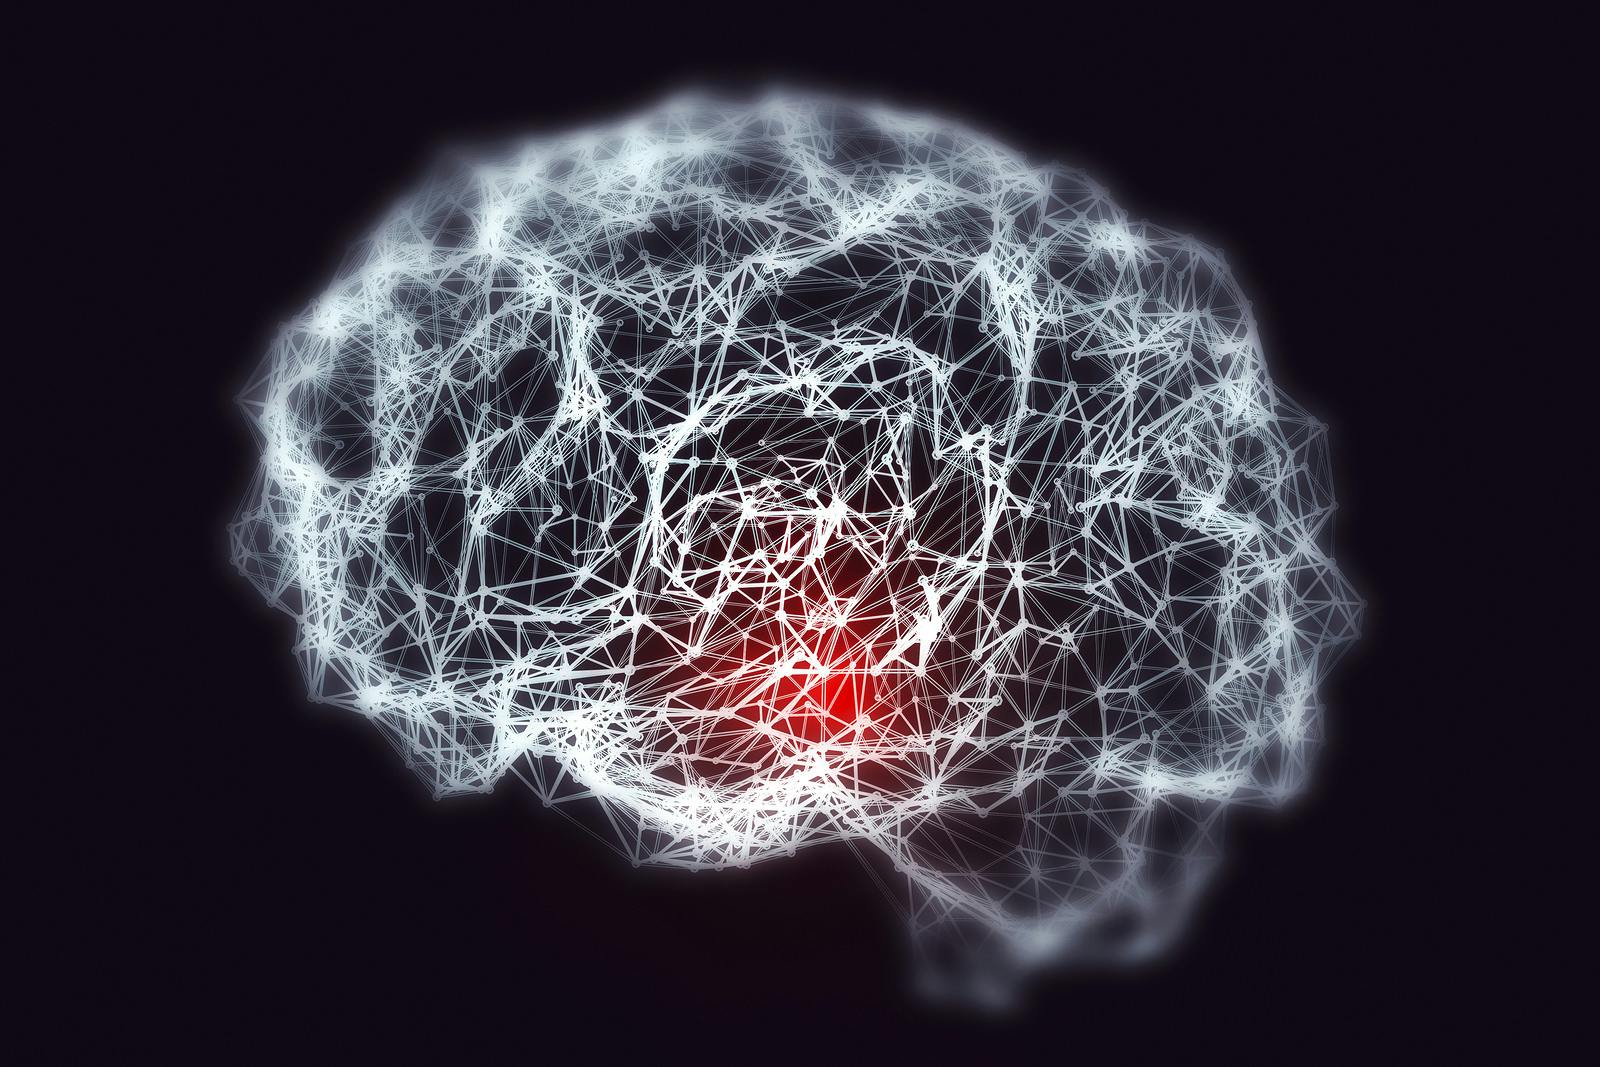 Dementia and Alzheimer&#8217;s disease medical concept, 3D illustration. Memory loss, brain aging. Conceptual image showing blurred brain with loss of neuronal networks
